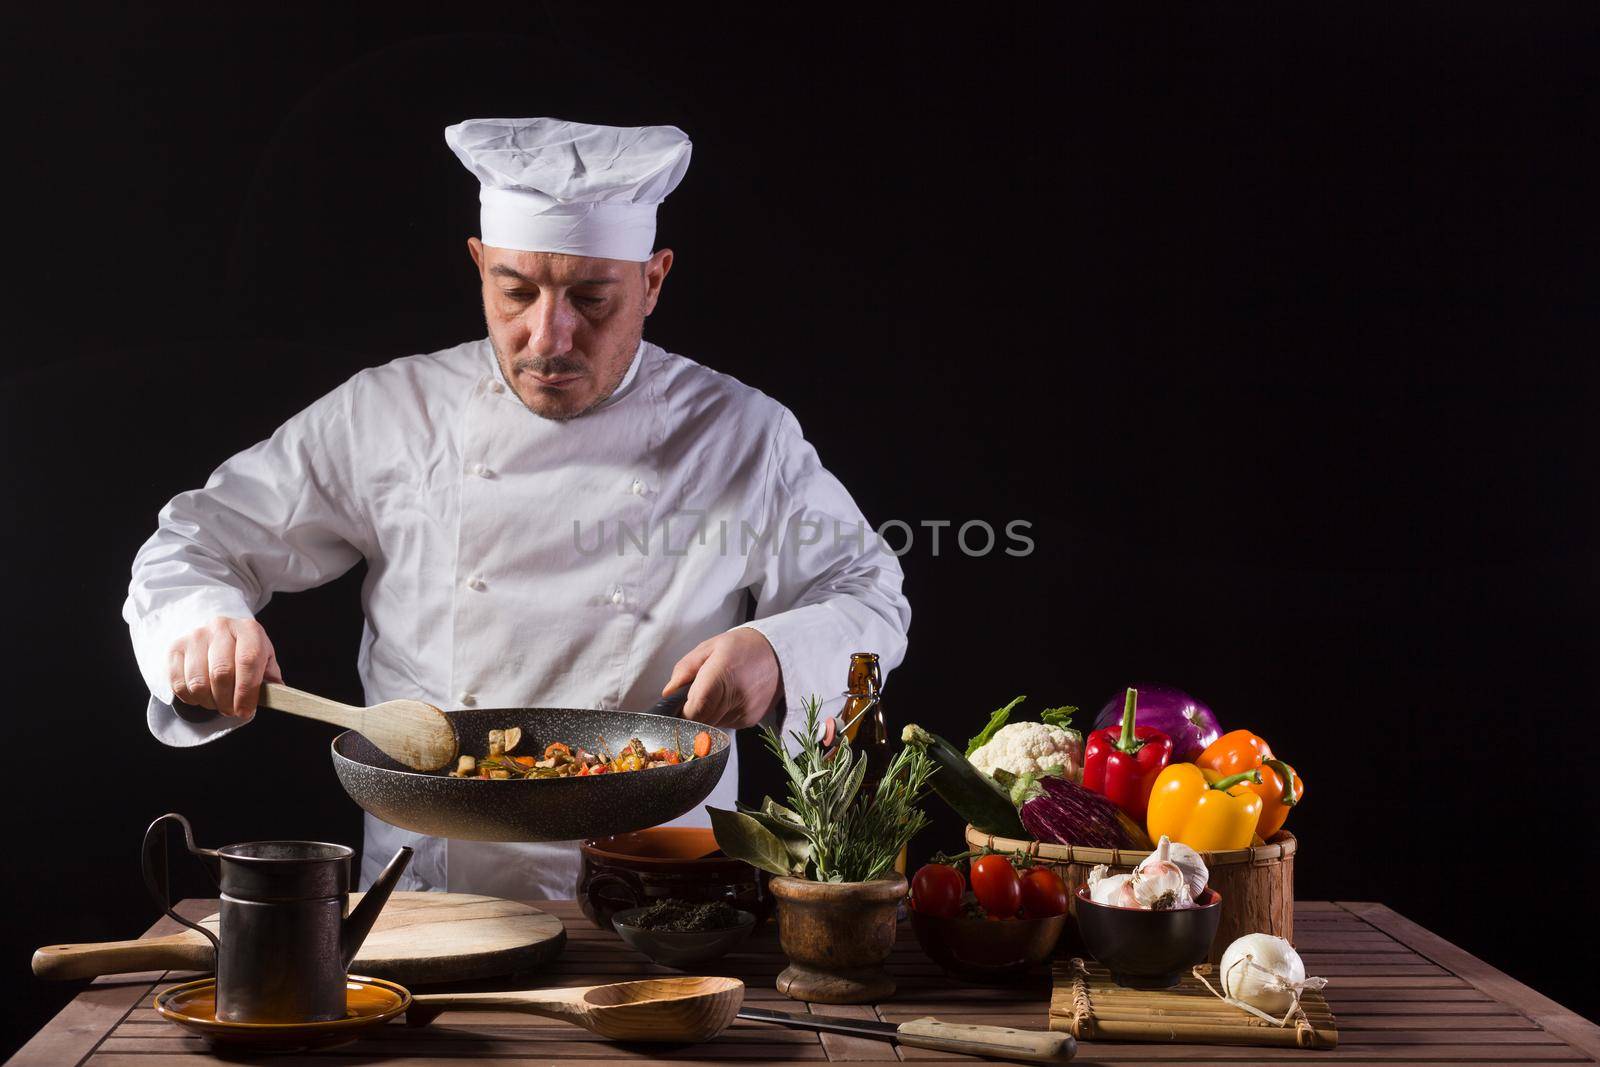 Chef in white uniform and hat with ladle mixes the ingredients onto the cooking pan by bepsimage